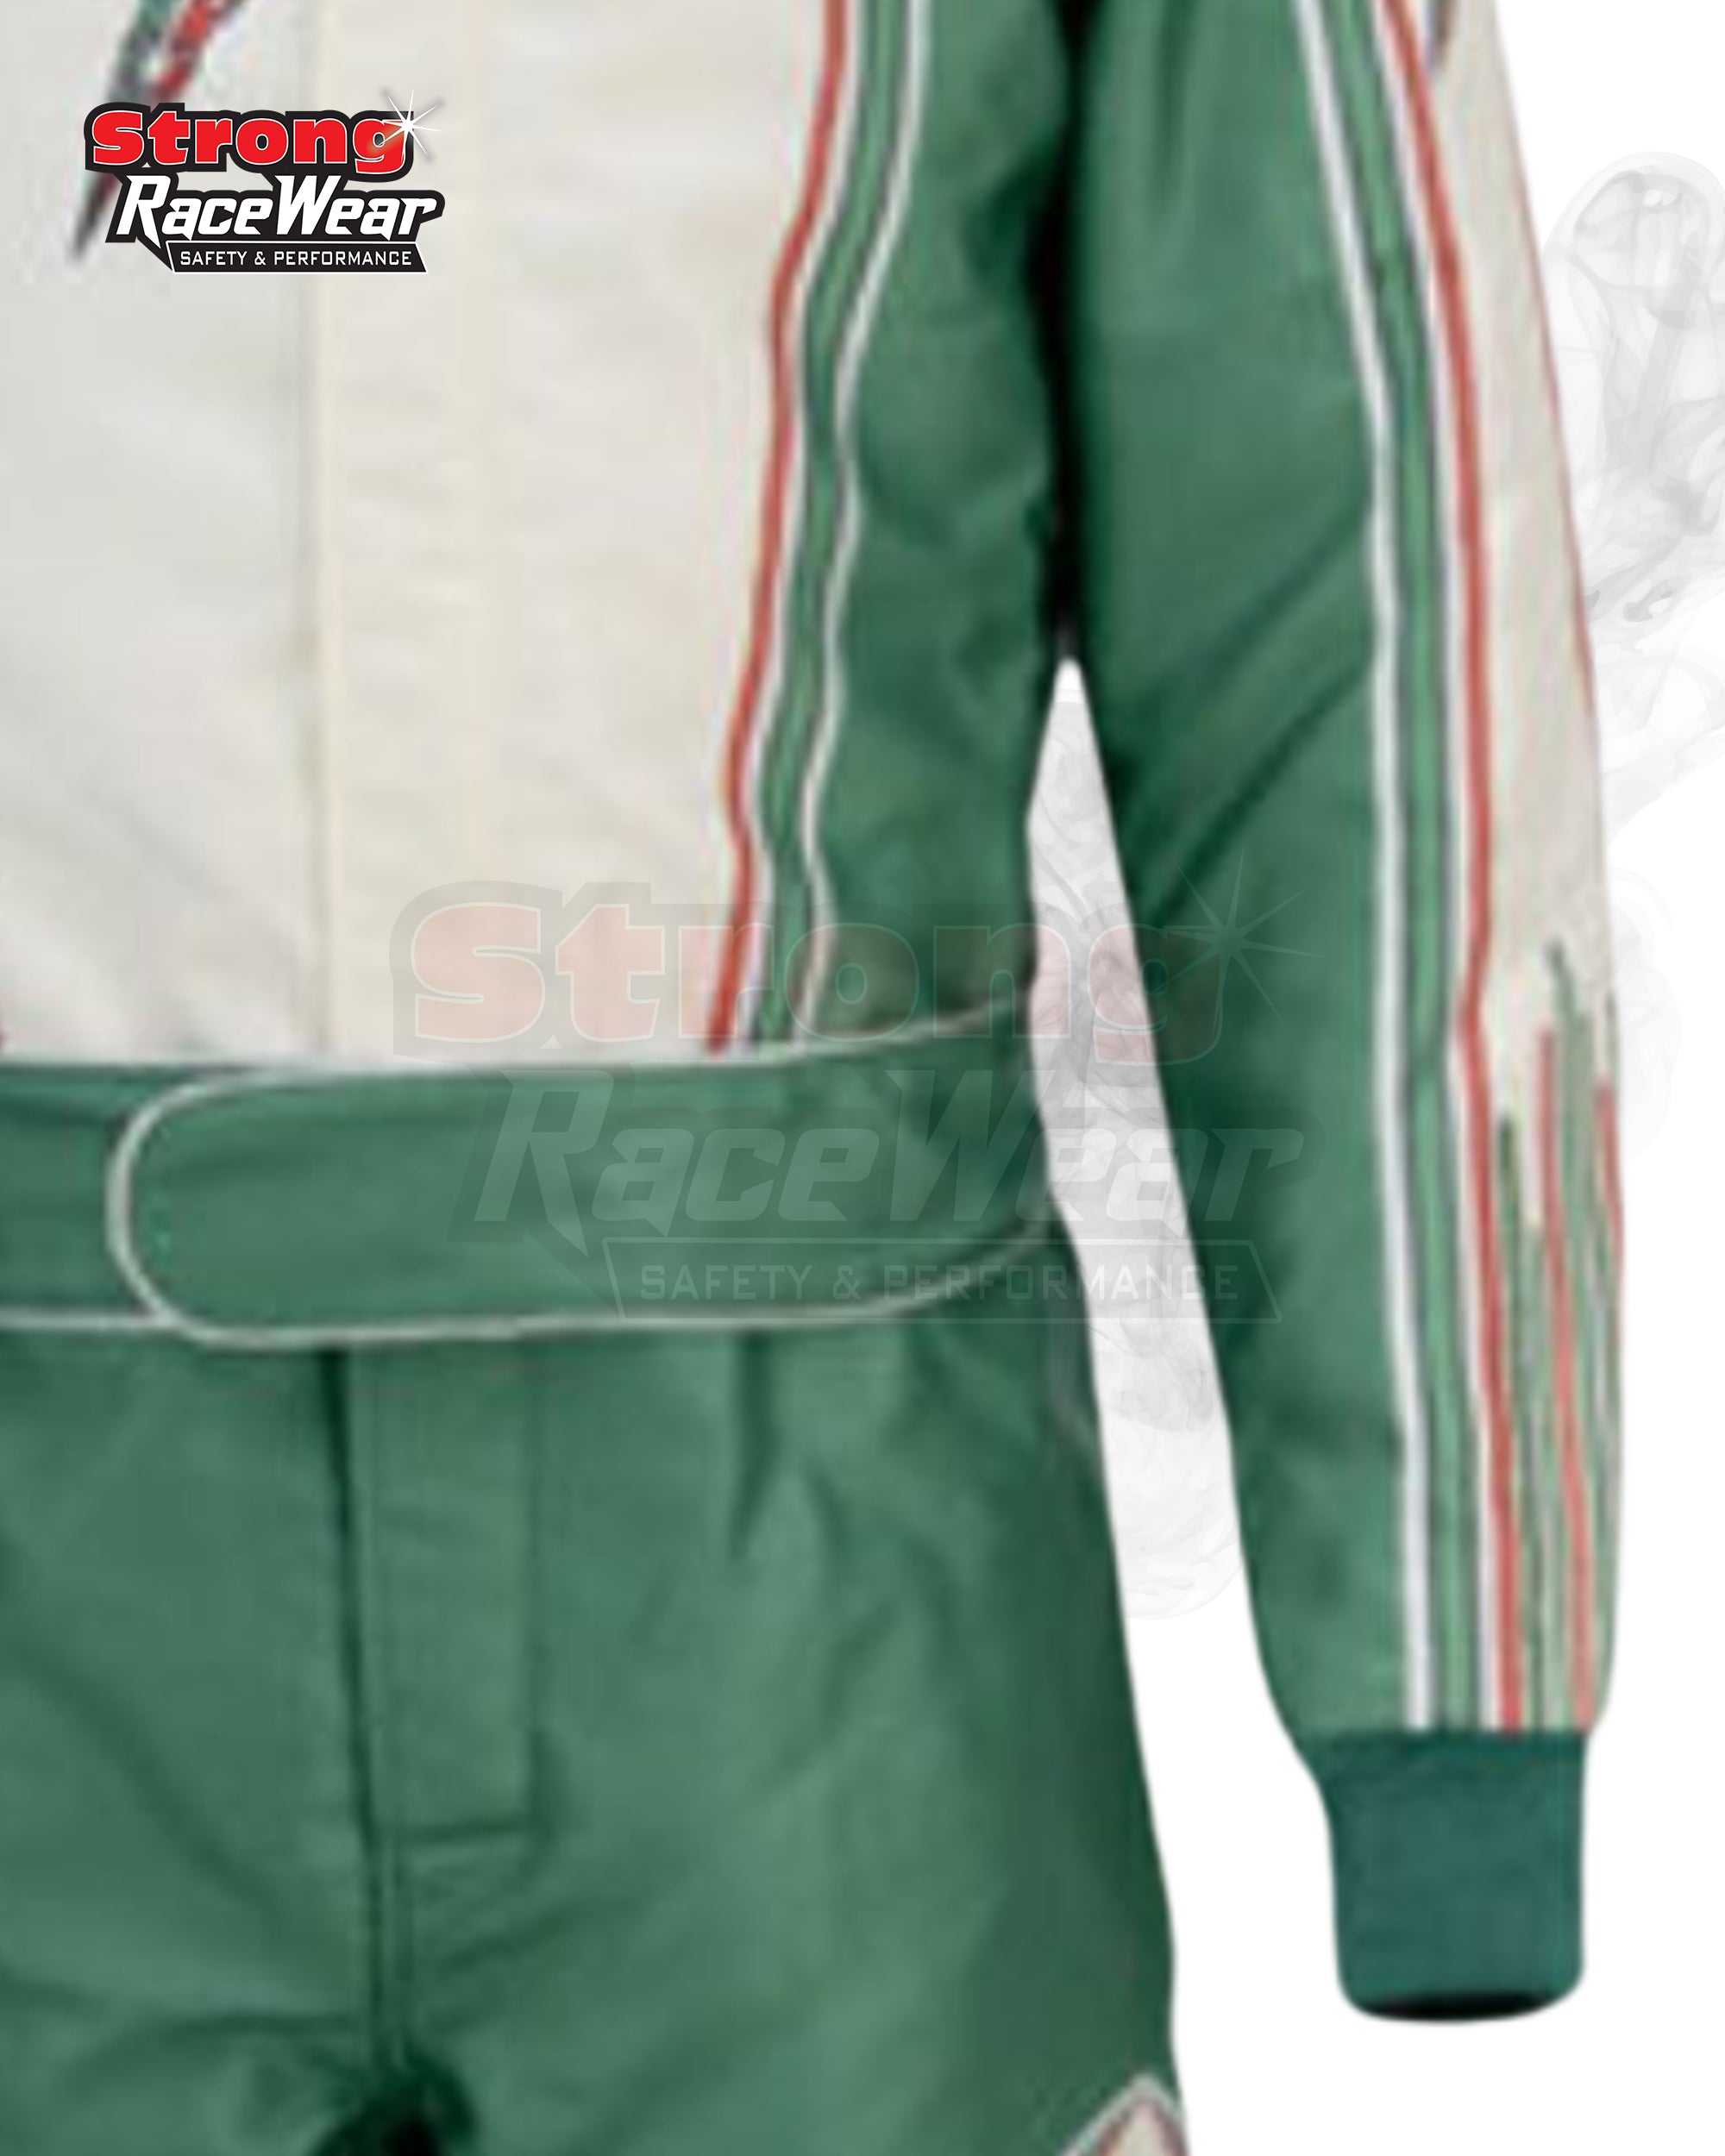 Tonykart Racing Suit by OMP